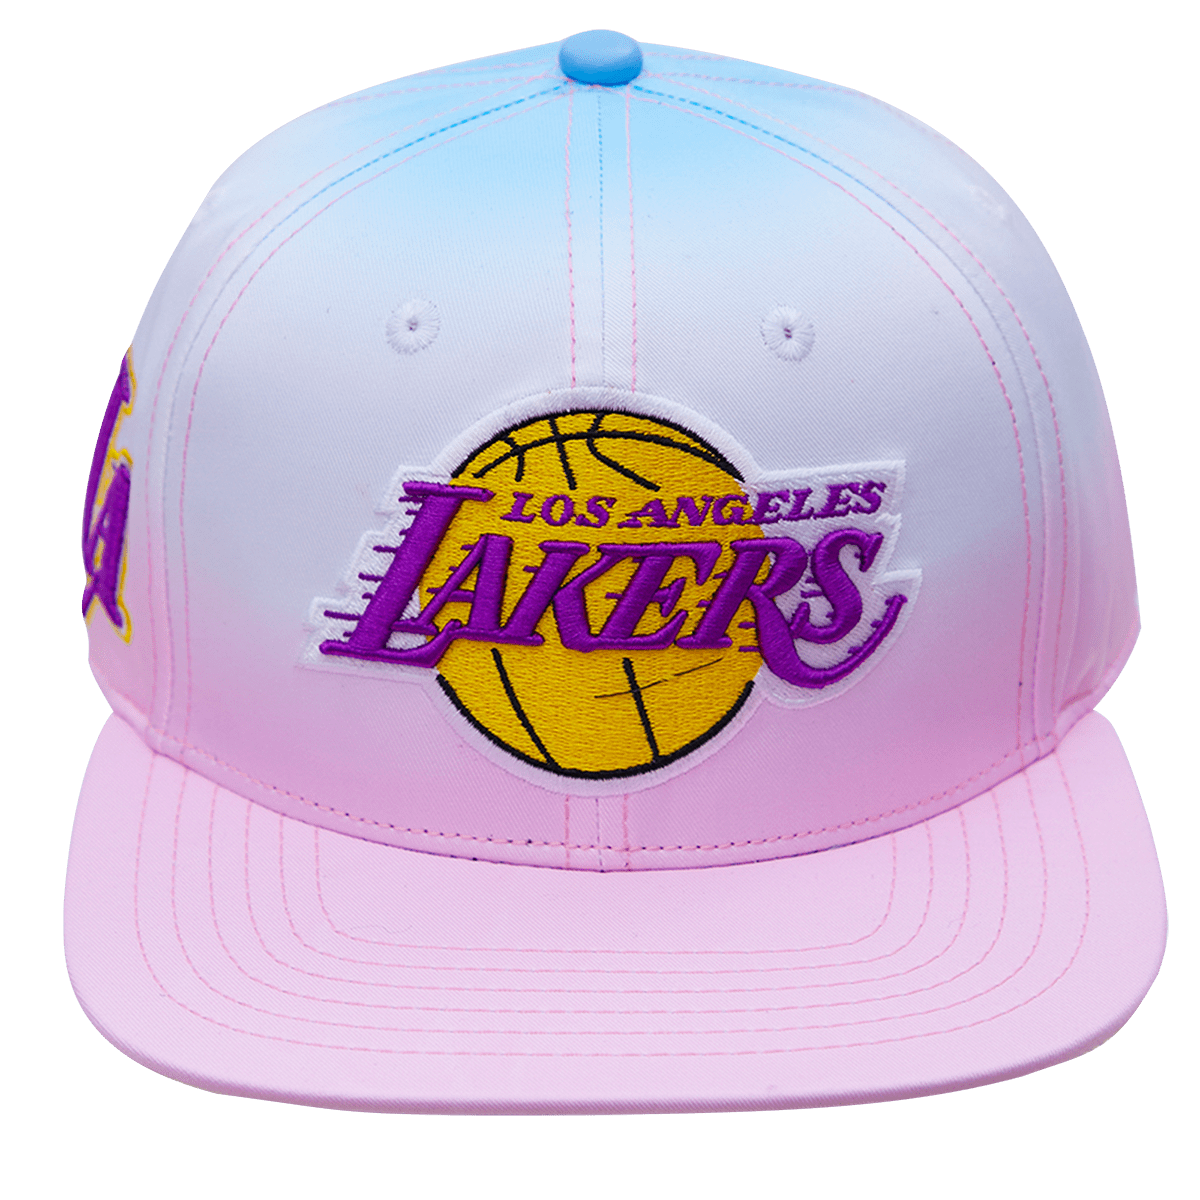 LOS ANGELES LAKERS PRO CARTOON PLAYER HOODY MELO (YELLOW) – Pro Standard